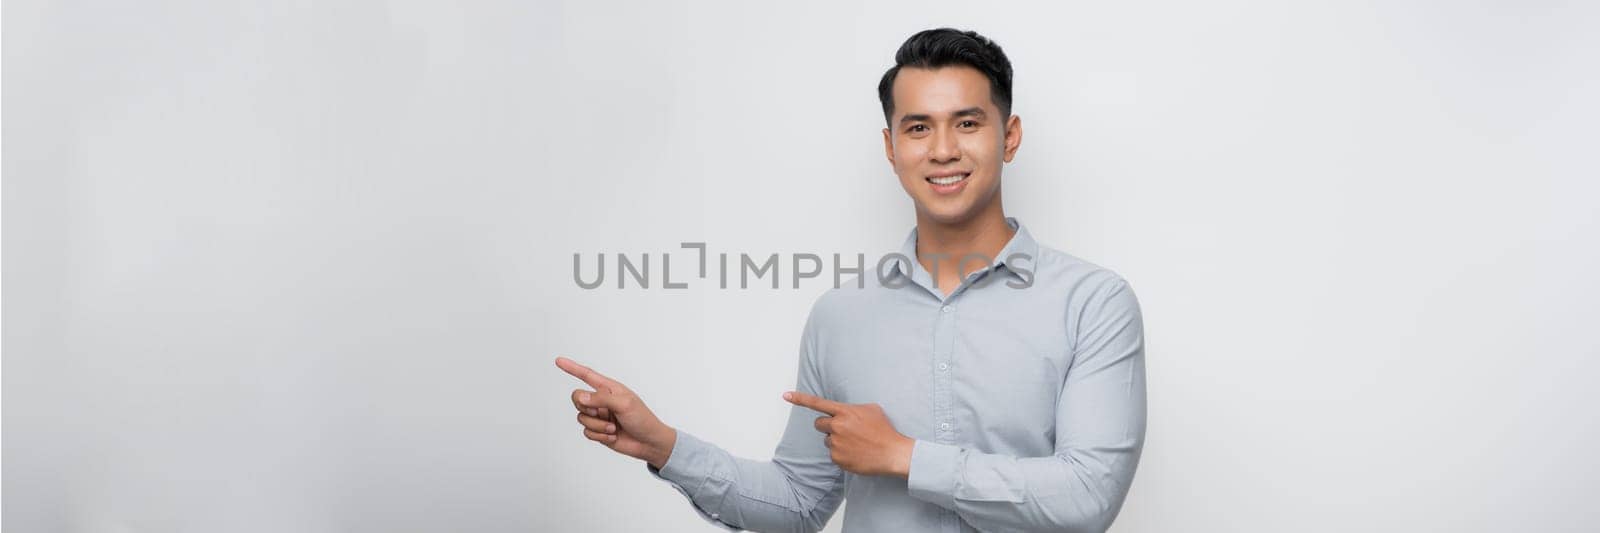 smiling young handsome Asian man pointing fingers in empty space aside